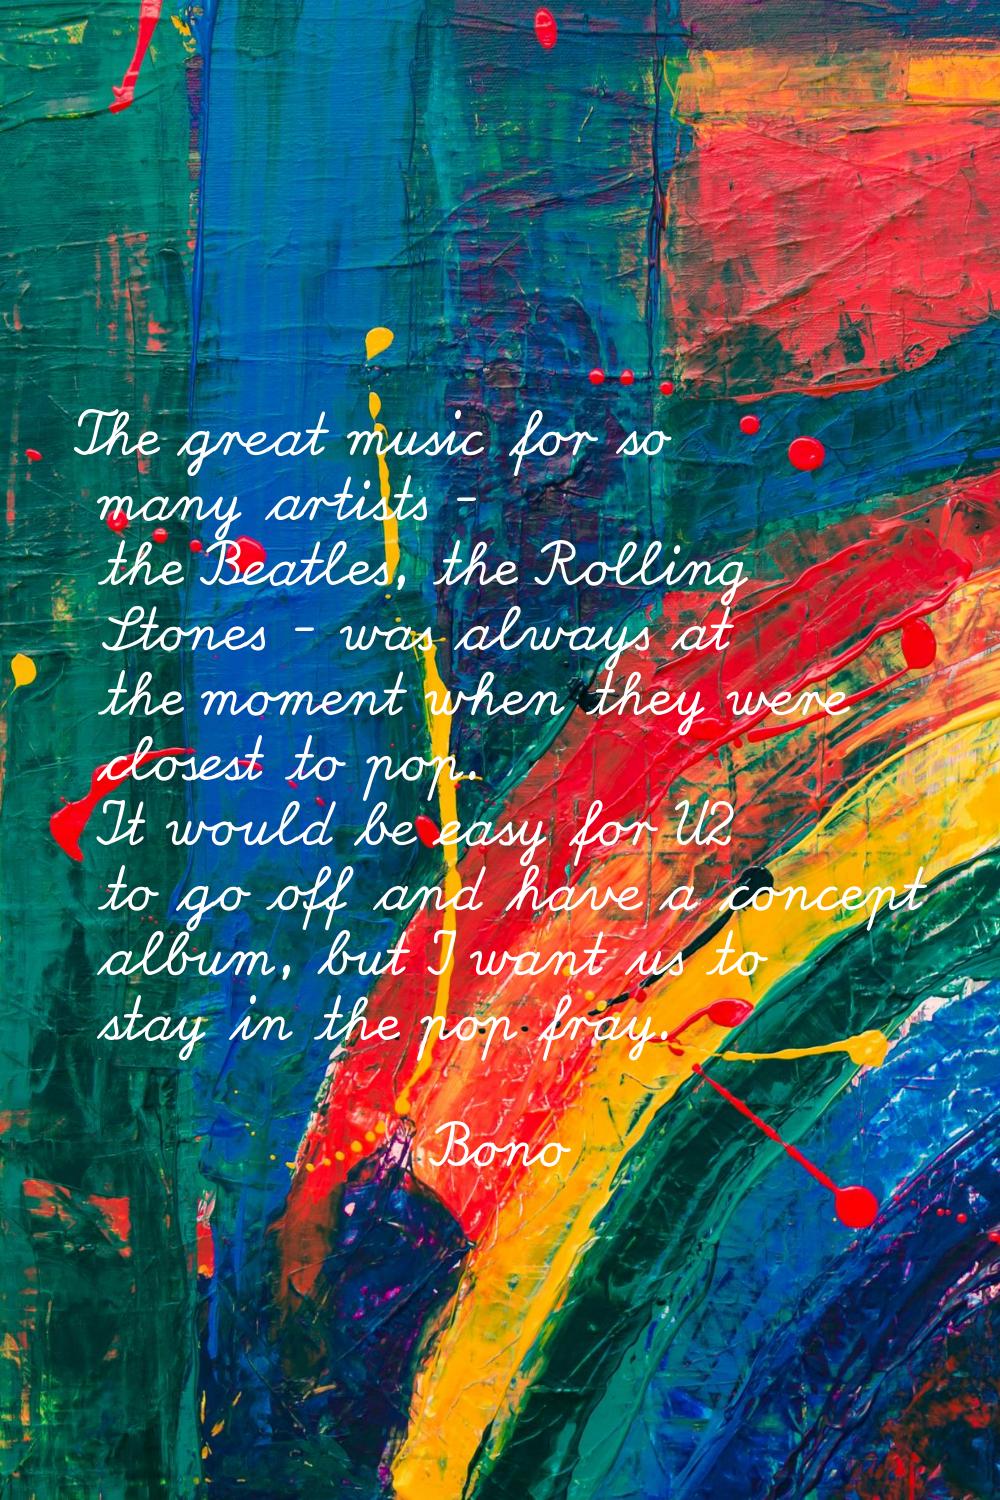 The great music for so many artists - the Beatles, the Rolling Stones - was always at the moment wh